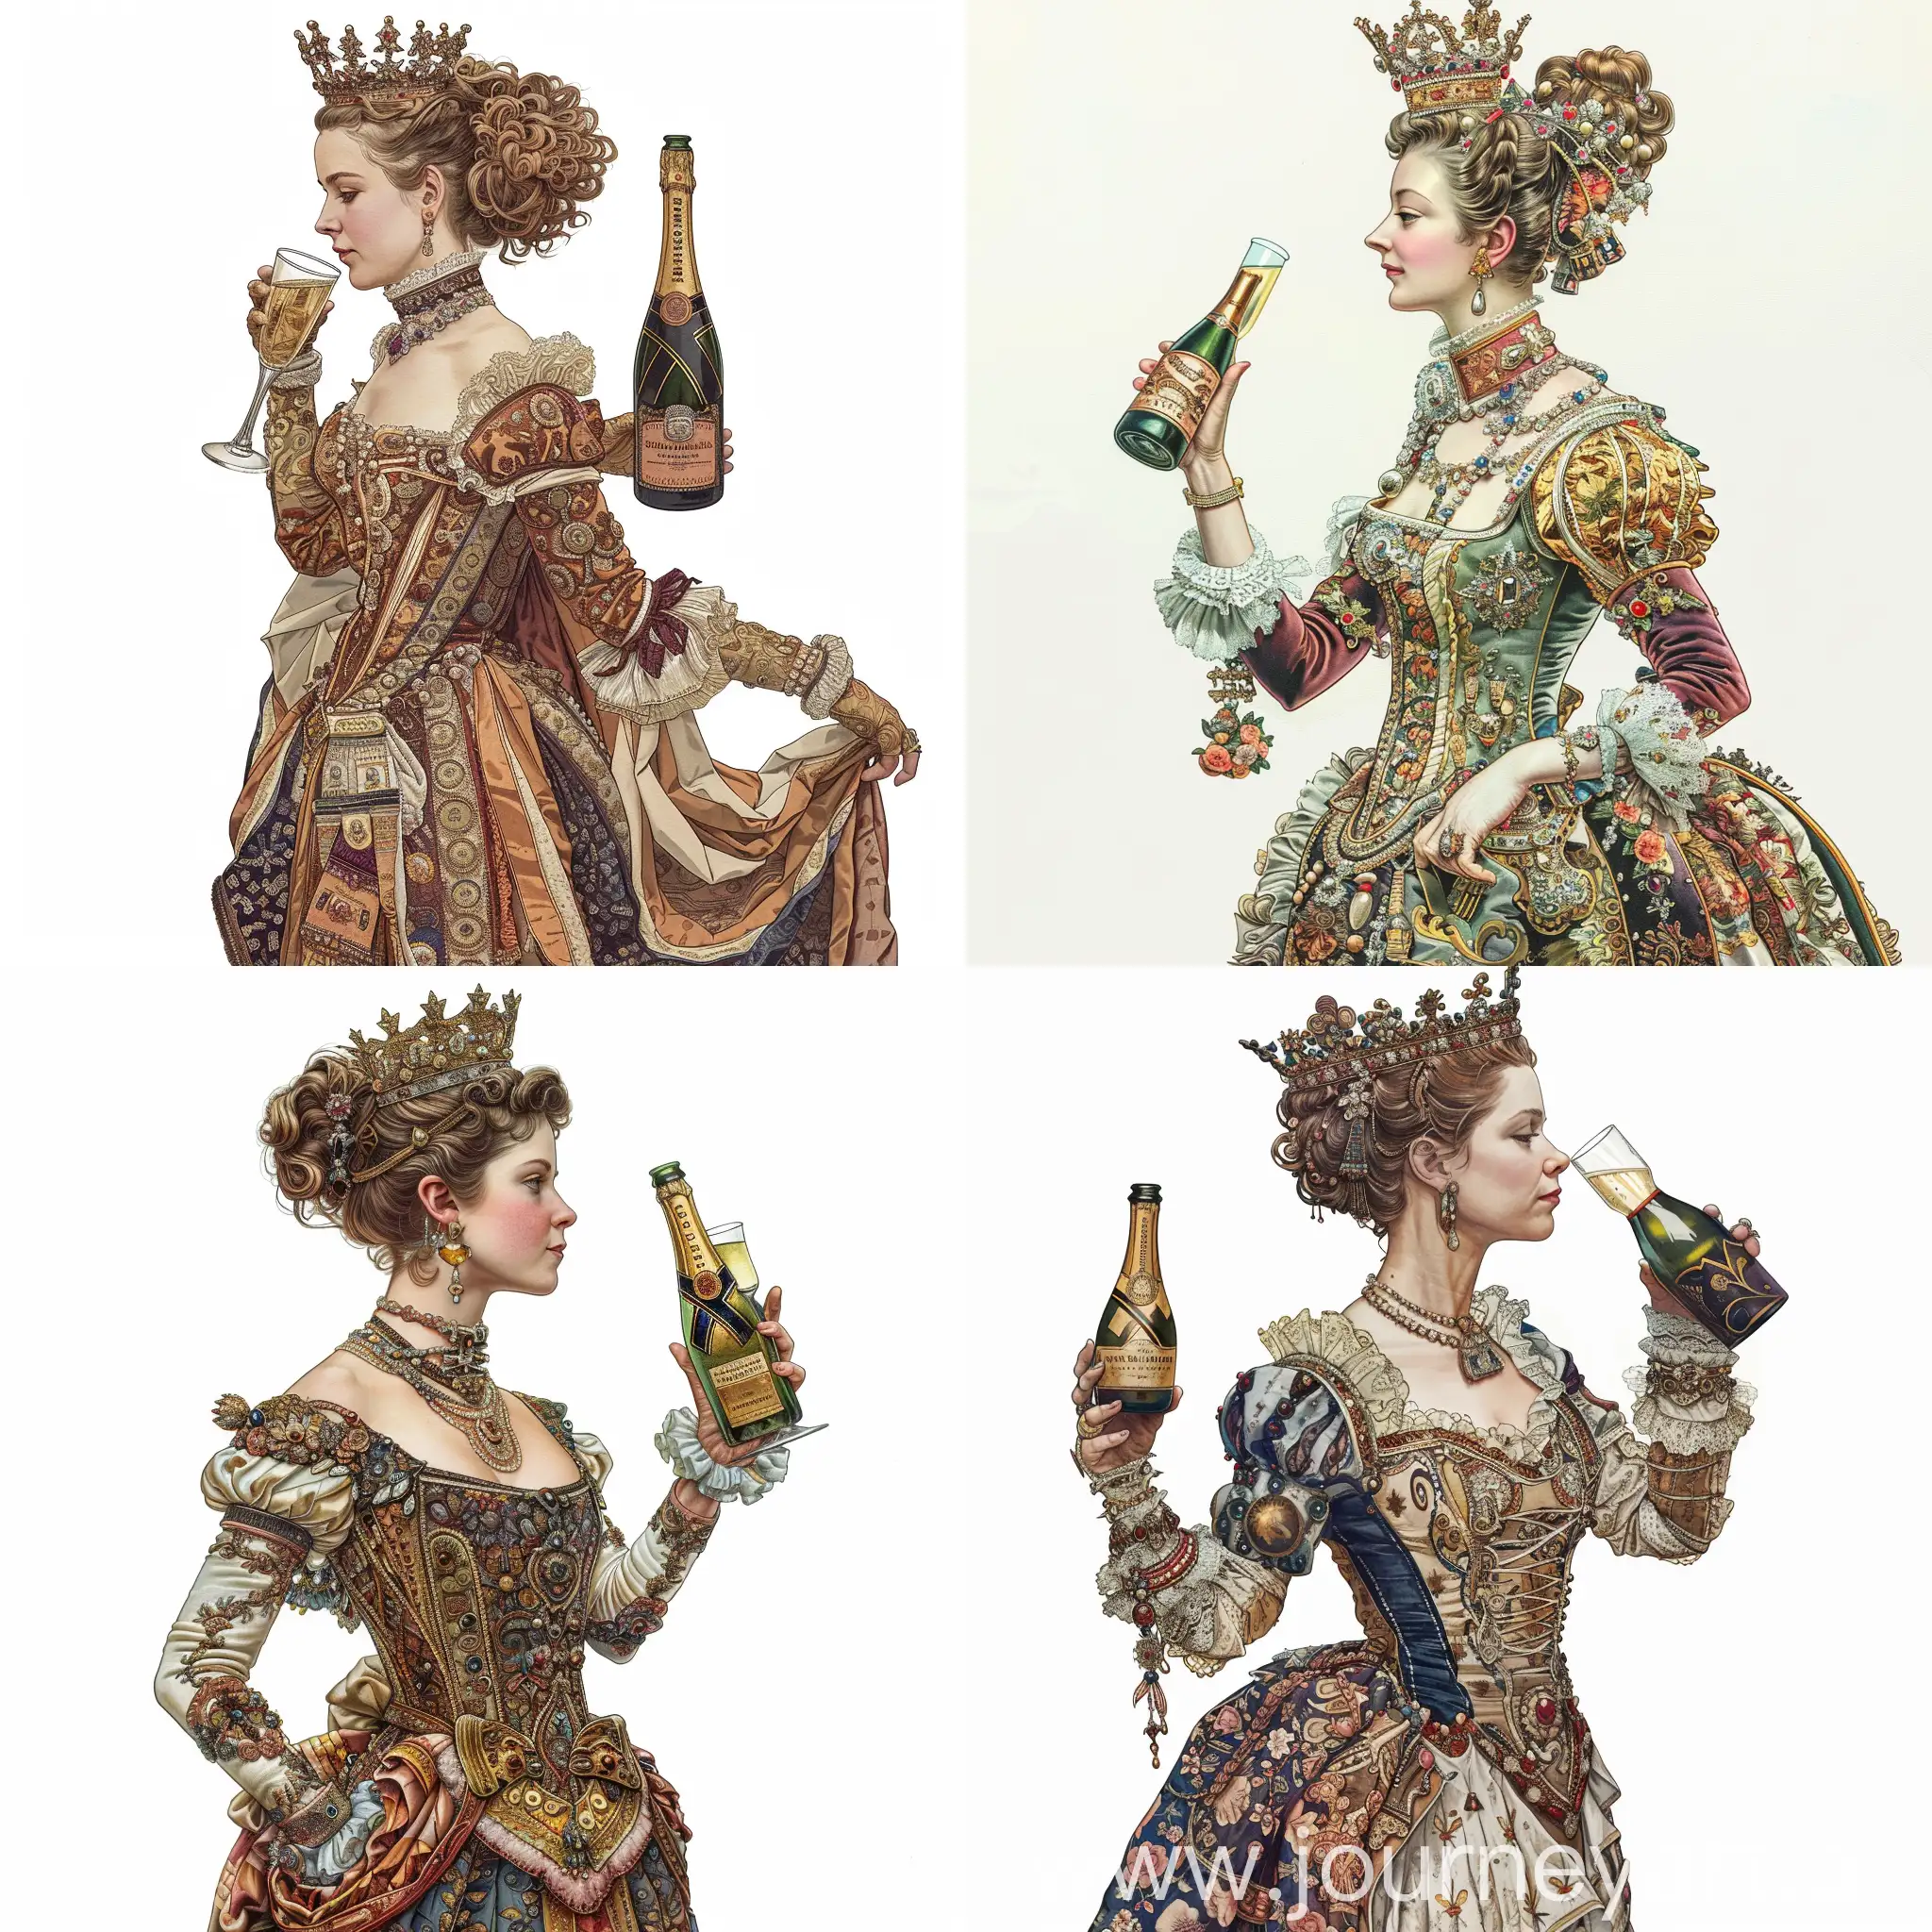 The queen of ancient Austria in profile, waist-high portrait, with a crown on her head, looking straight, in antique ornate, exquisite clothes, holding a glass glass with champagne at chin level, the other arm bent at the elbow and holding a bottle, complex colors, illustration, on a white background, Arthur Wrexham style